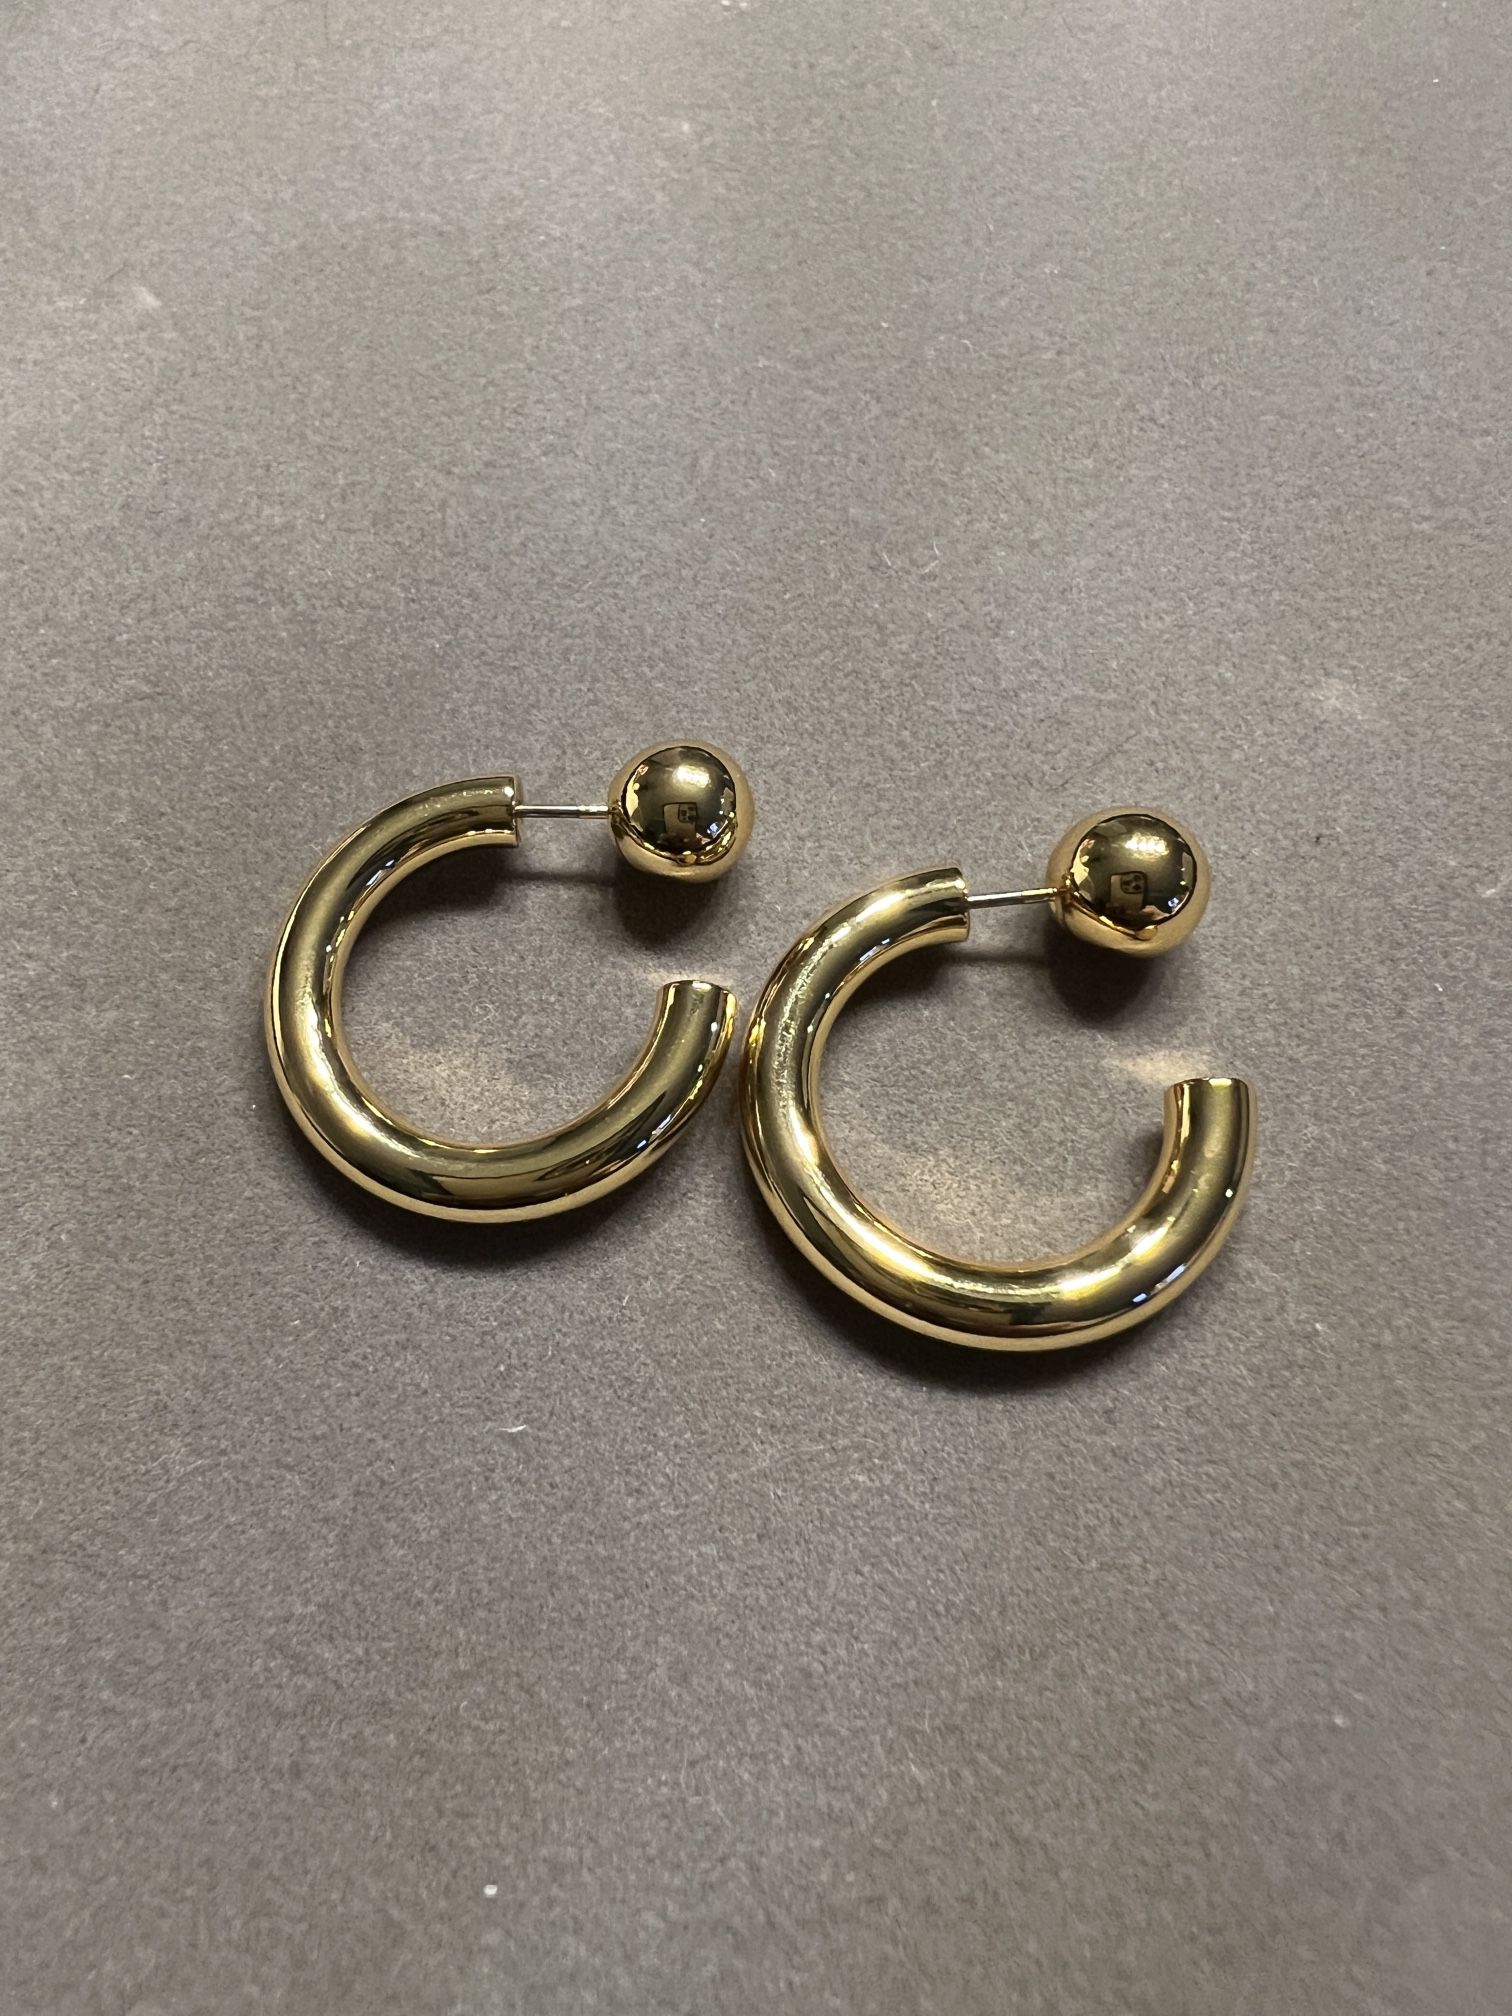 Golden front and back earrings